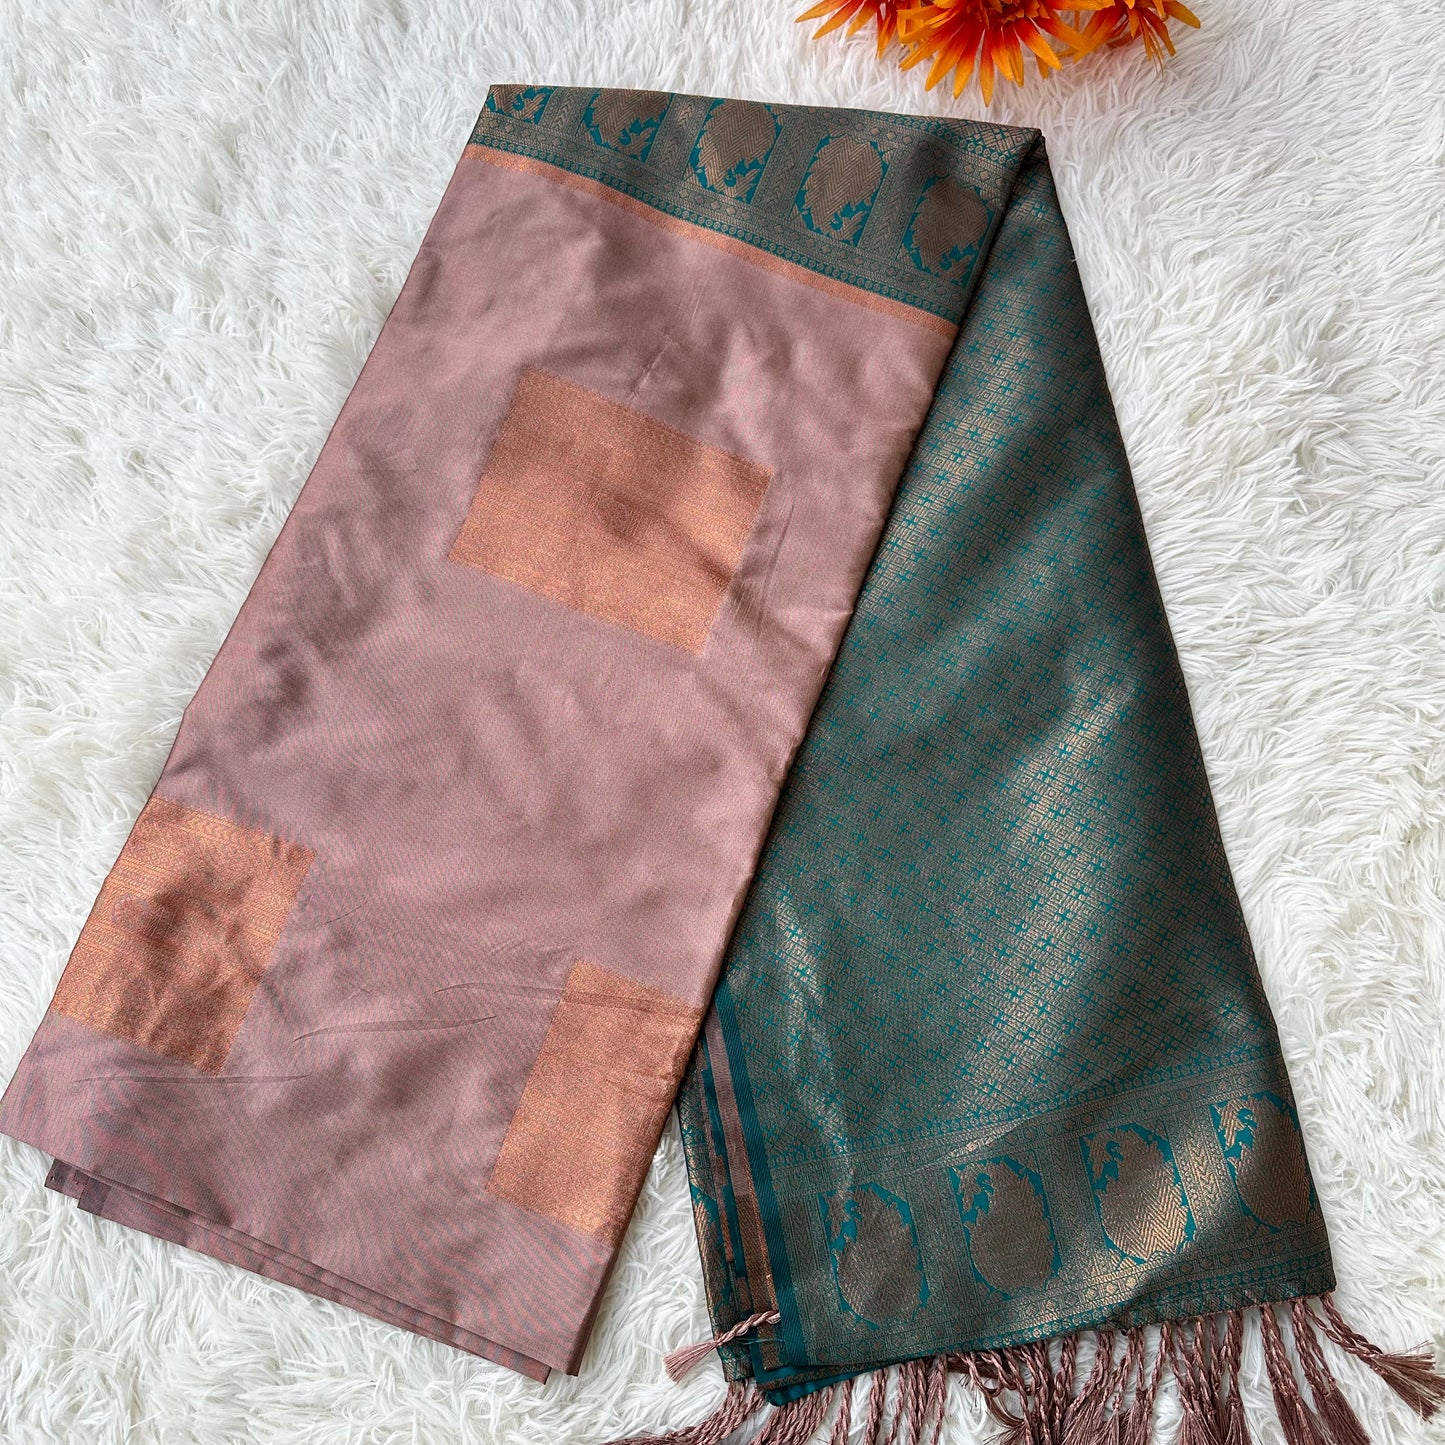 Serenity in Contrast: Plaster Brown Saree with Blue-Green Pallu